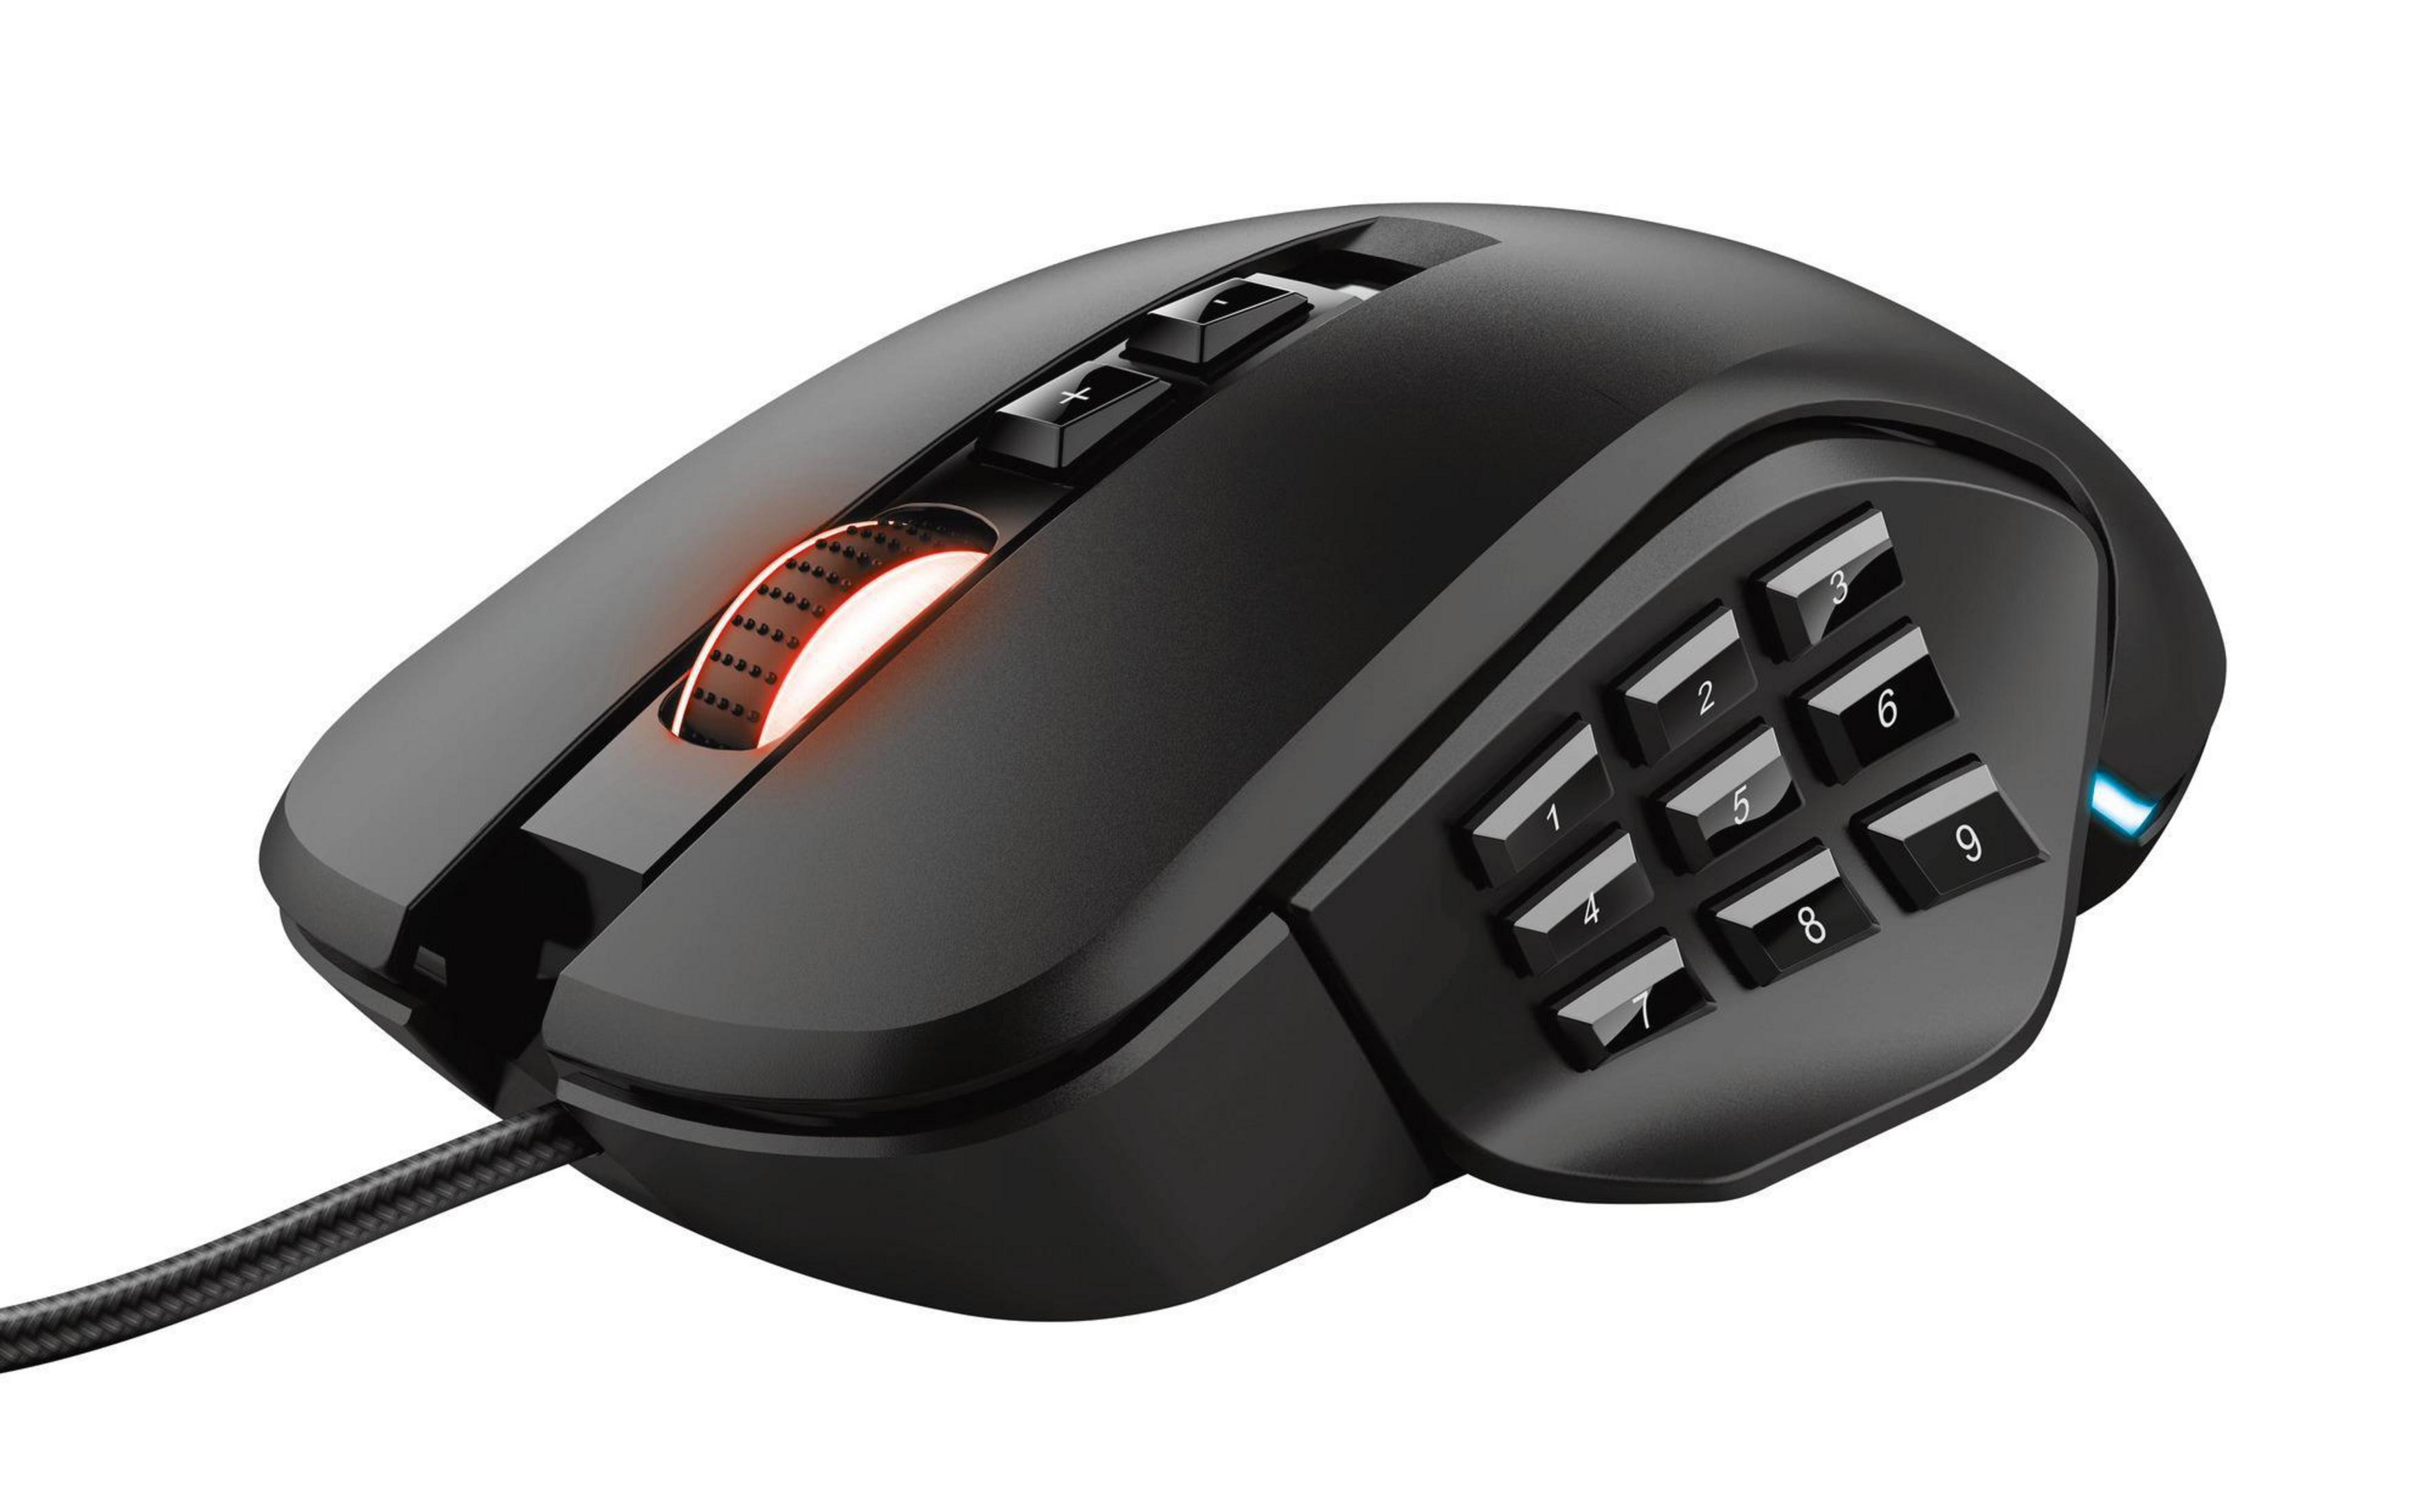 CUSTOMISABLE 970 GXT Schwarz 23764 Maus, MOUSE TRUST Gaming GAMING MORFIX